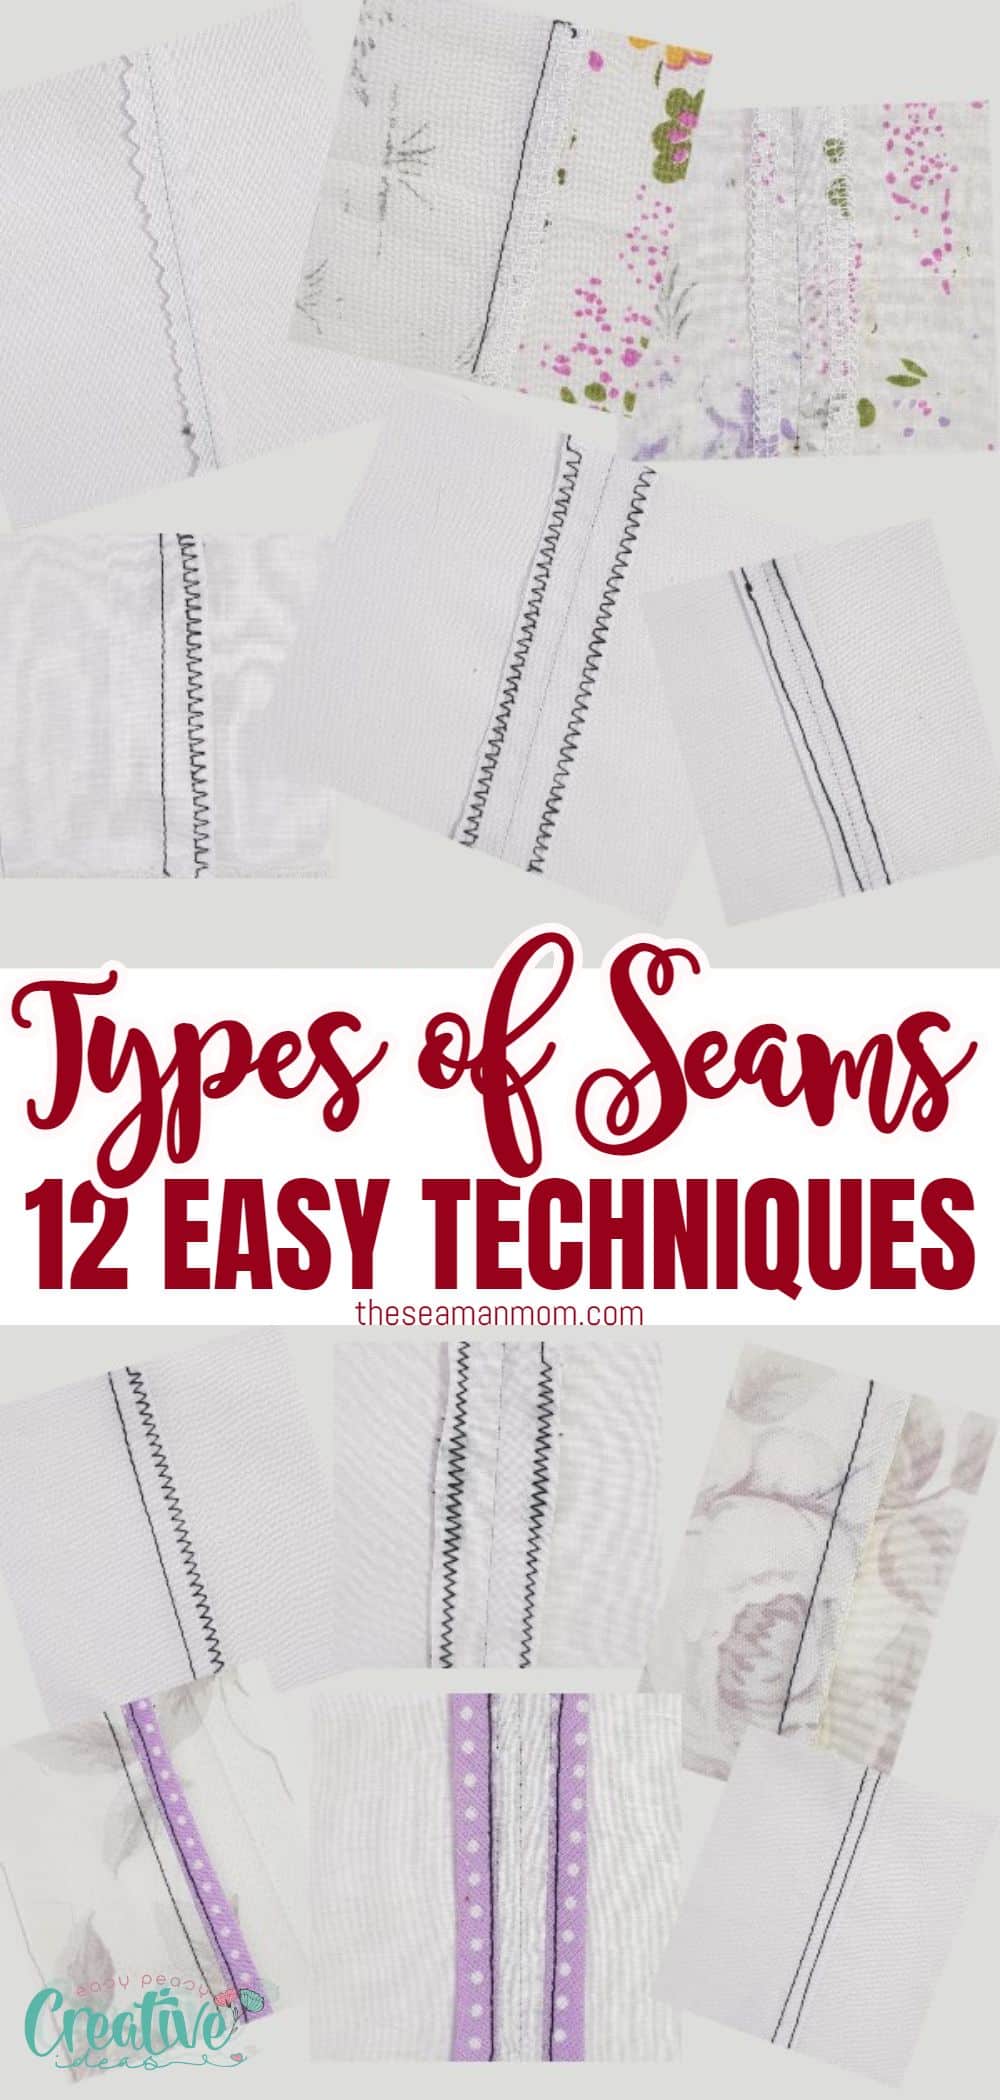 Seam finishes can completely elevate the aesthetic of your sewn garment! With this tutorial, you'll explore 12 types of seams that are both enjoyable and effortless to craft. Get creative while learning new seam techniques and make some serious fashion statements with your sewing skills via @petroneagu